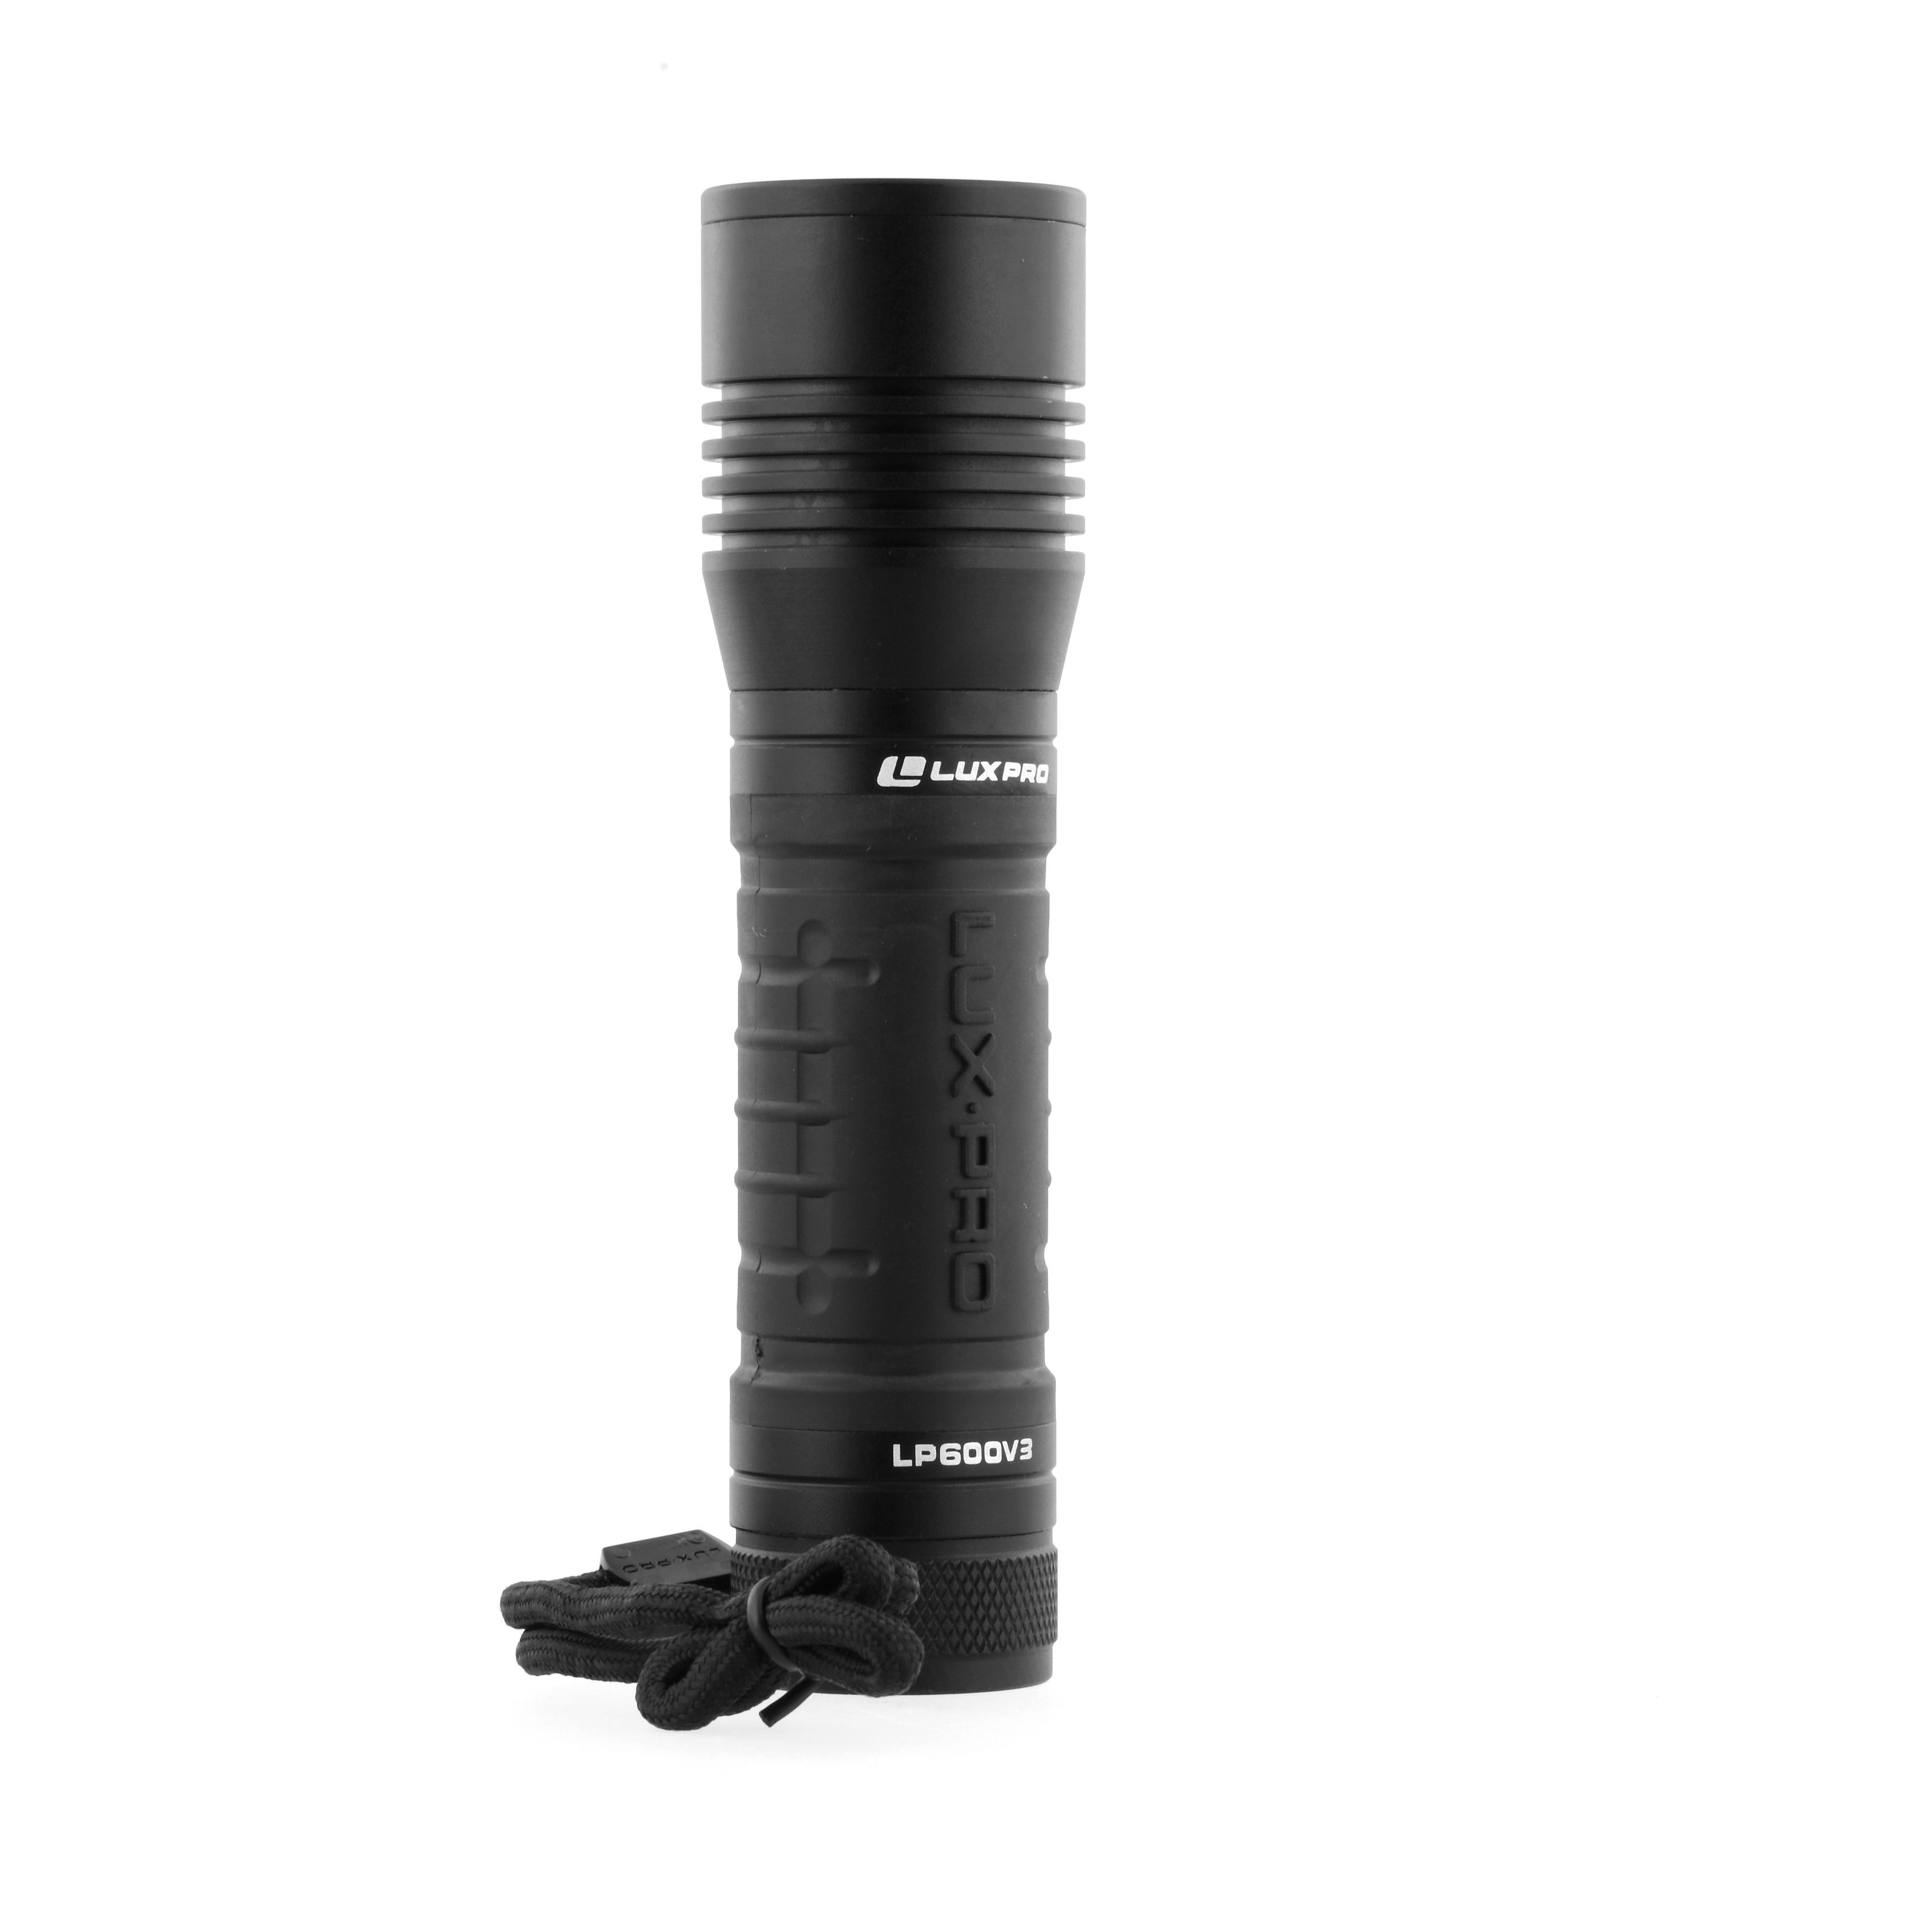 Details about   5x 350000Lumens Zoomable 5-Modes LED Flashlight Aluminum Light Torch & Charger 